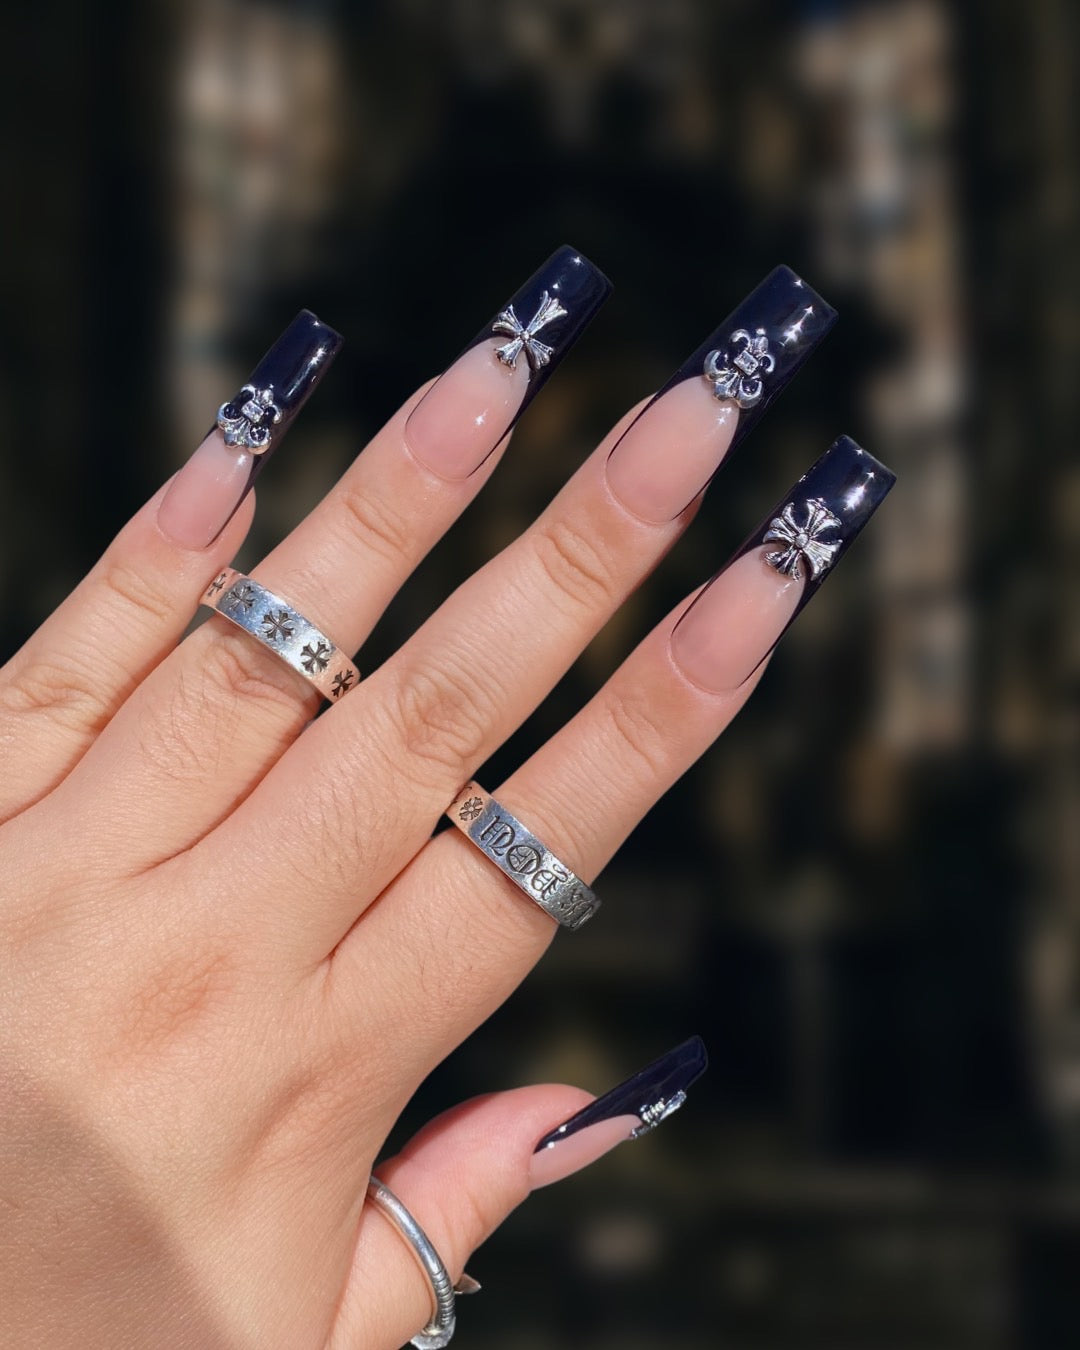 40+ Dark and Stylish Gothic Nails With a Korean Twist | The KA Edit | Gothic  nails, Goth nails, Punk nails